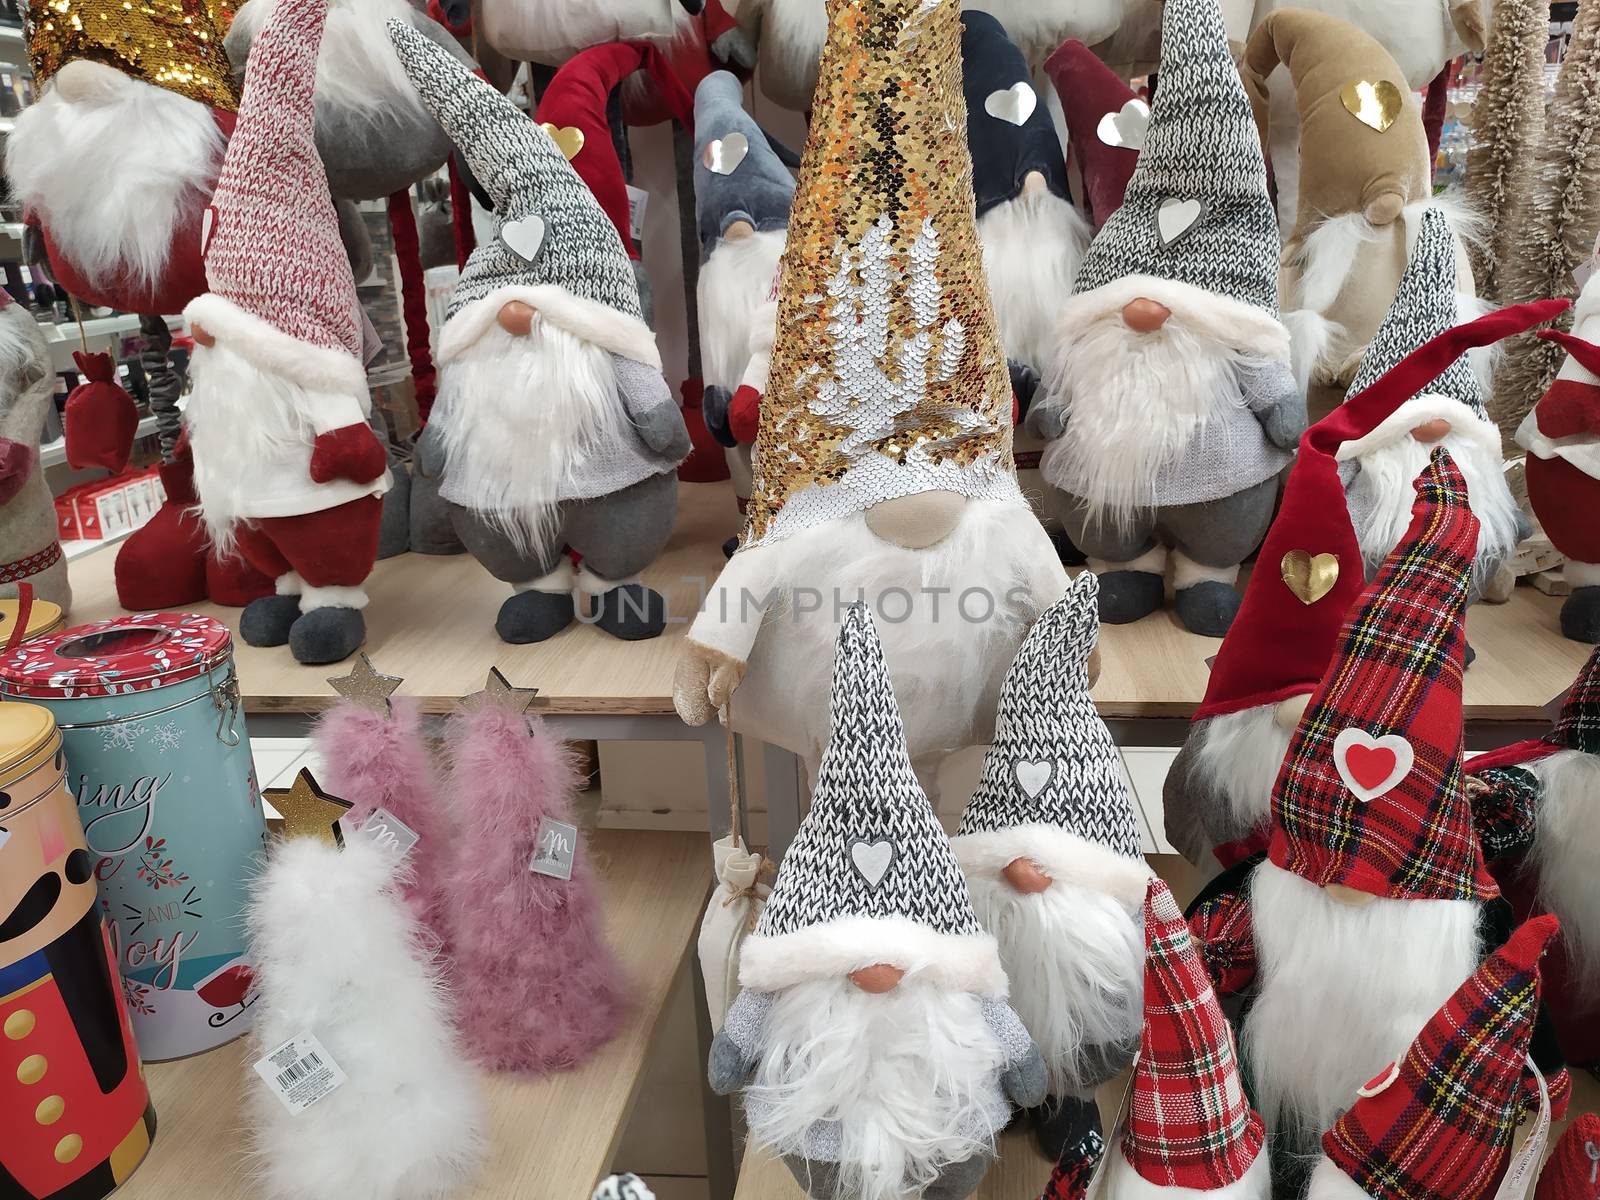 Christmas decorations displayed in a shop by brambillasimone